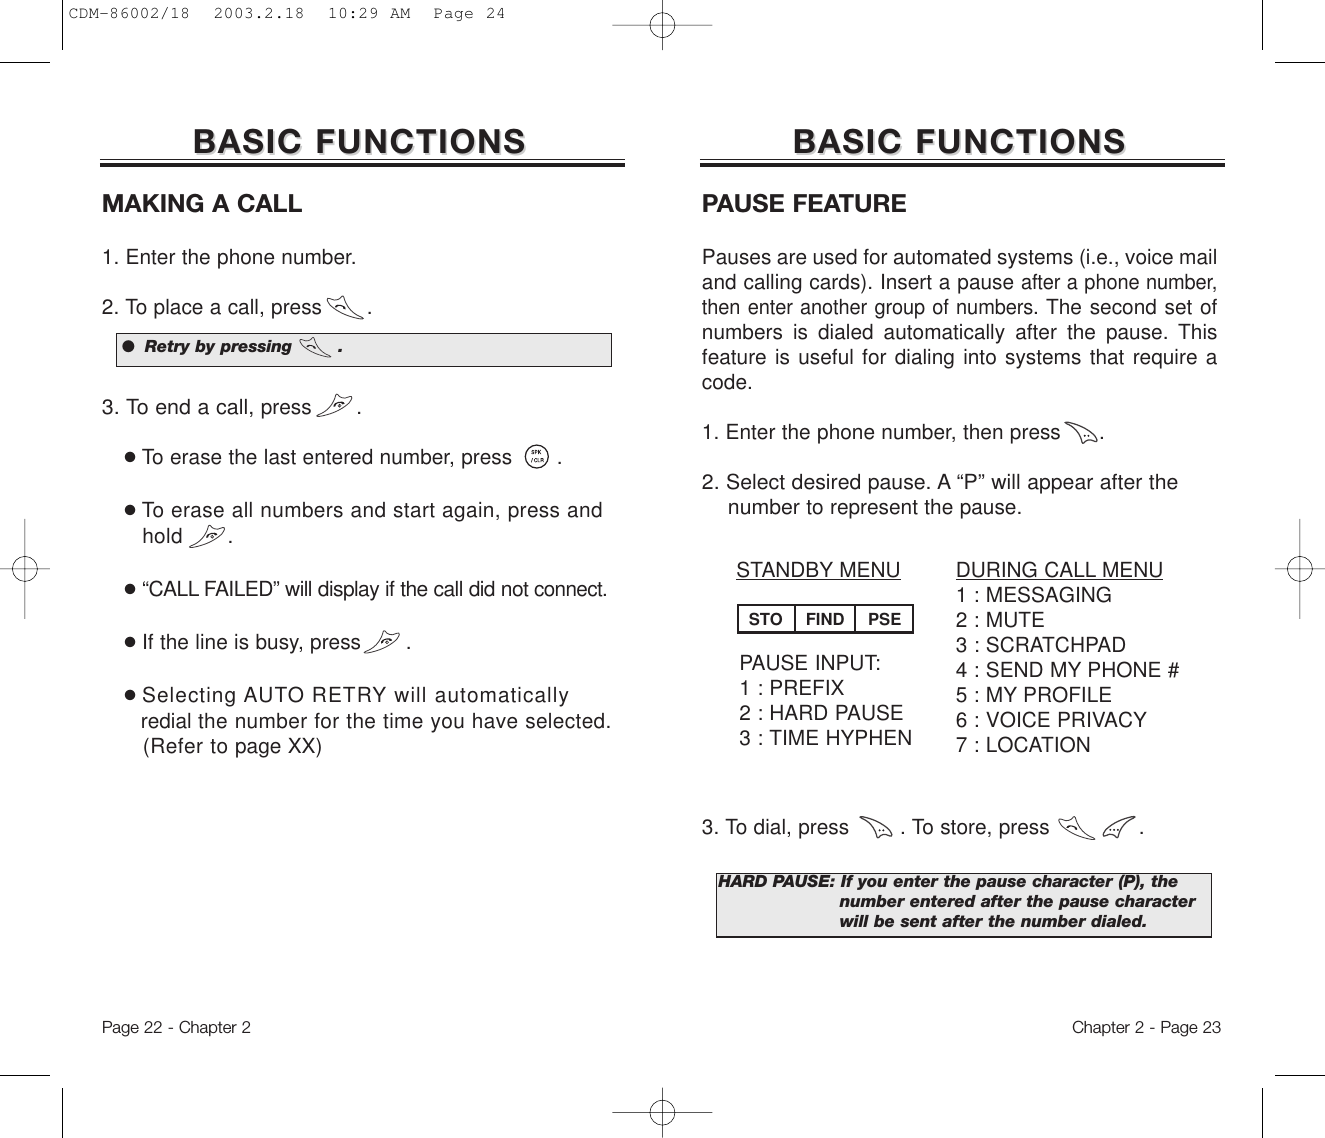 Chapter 2 - Page 23BASIC FUNCTIONSBASIC FUNCTIONSMAKING A CALL1. Enter the phone number. 2. To place a call, press       .3. To end a call, press       .●To erase the last entered number, press       .●To erase all numbers and start again, press and hold .●“CALL FAILED” will display if the call did notconnect.●If the line is busy, press       .  ●Selecting AUTO RETRY will automaticallyredial the number for the time you have selected.(Refer to page XX)●  Retry by pressing        .BASIC FUNCTIONSBASIC FUNCTIONSDURING CALL MENU1 : MESSAGING2 : MUTE3 : SCRATCHPAD4 : SEND MY PHONE #5 : MY PROFILE6 : VOICE PRIVACY7 : LOCATIONSTANDBY MENUPAUSE INPUT:1 : PREFIX2 : HARD PAUSE3 : TIME HYPHENPAUSE FEATUREPauses are used for automated systems (i.e., voice mailand calling cards). Insert a pause after a phone number,then enter another group of numbers. The second set ofnumbers is dialed automatically after the pause. Thisfeature is useful for dialing into systems that require acode.1. Enter the phone number, then press      .2. Select desired pause. A “P” will appear after the numberto represent the pause.3. To dial, press        . To store, press              .         HARD PAUSE: If you enter the pause character (P), the  number entered after the pause character will be sent after the number dialed.STO FIND PSEPage 22 - Chapter 2CDM-86002/18  2003.2.18  10:29 AM  Page 24